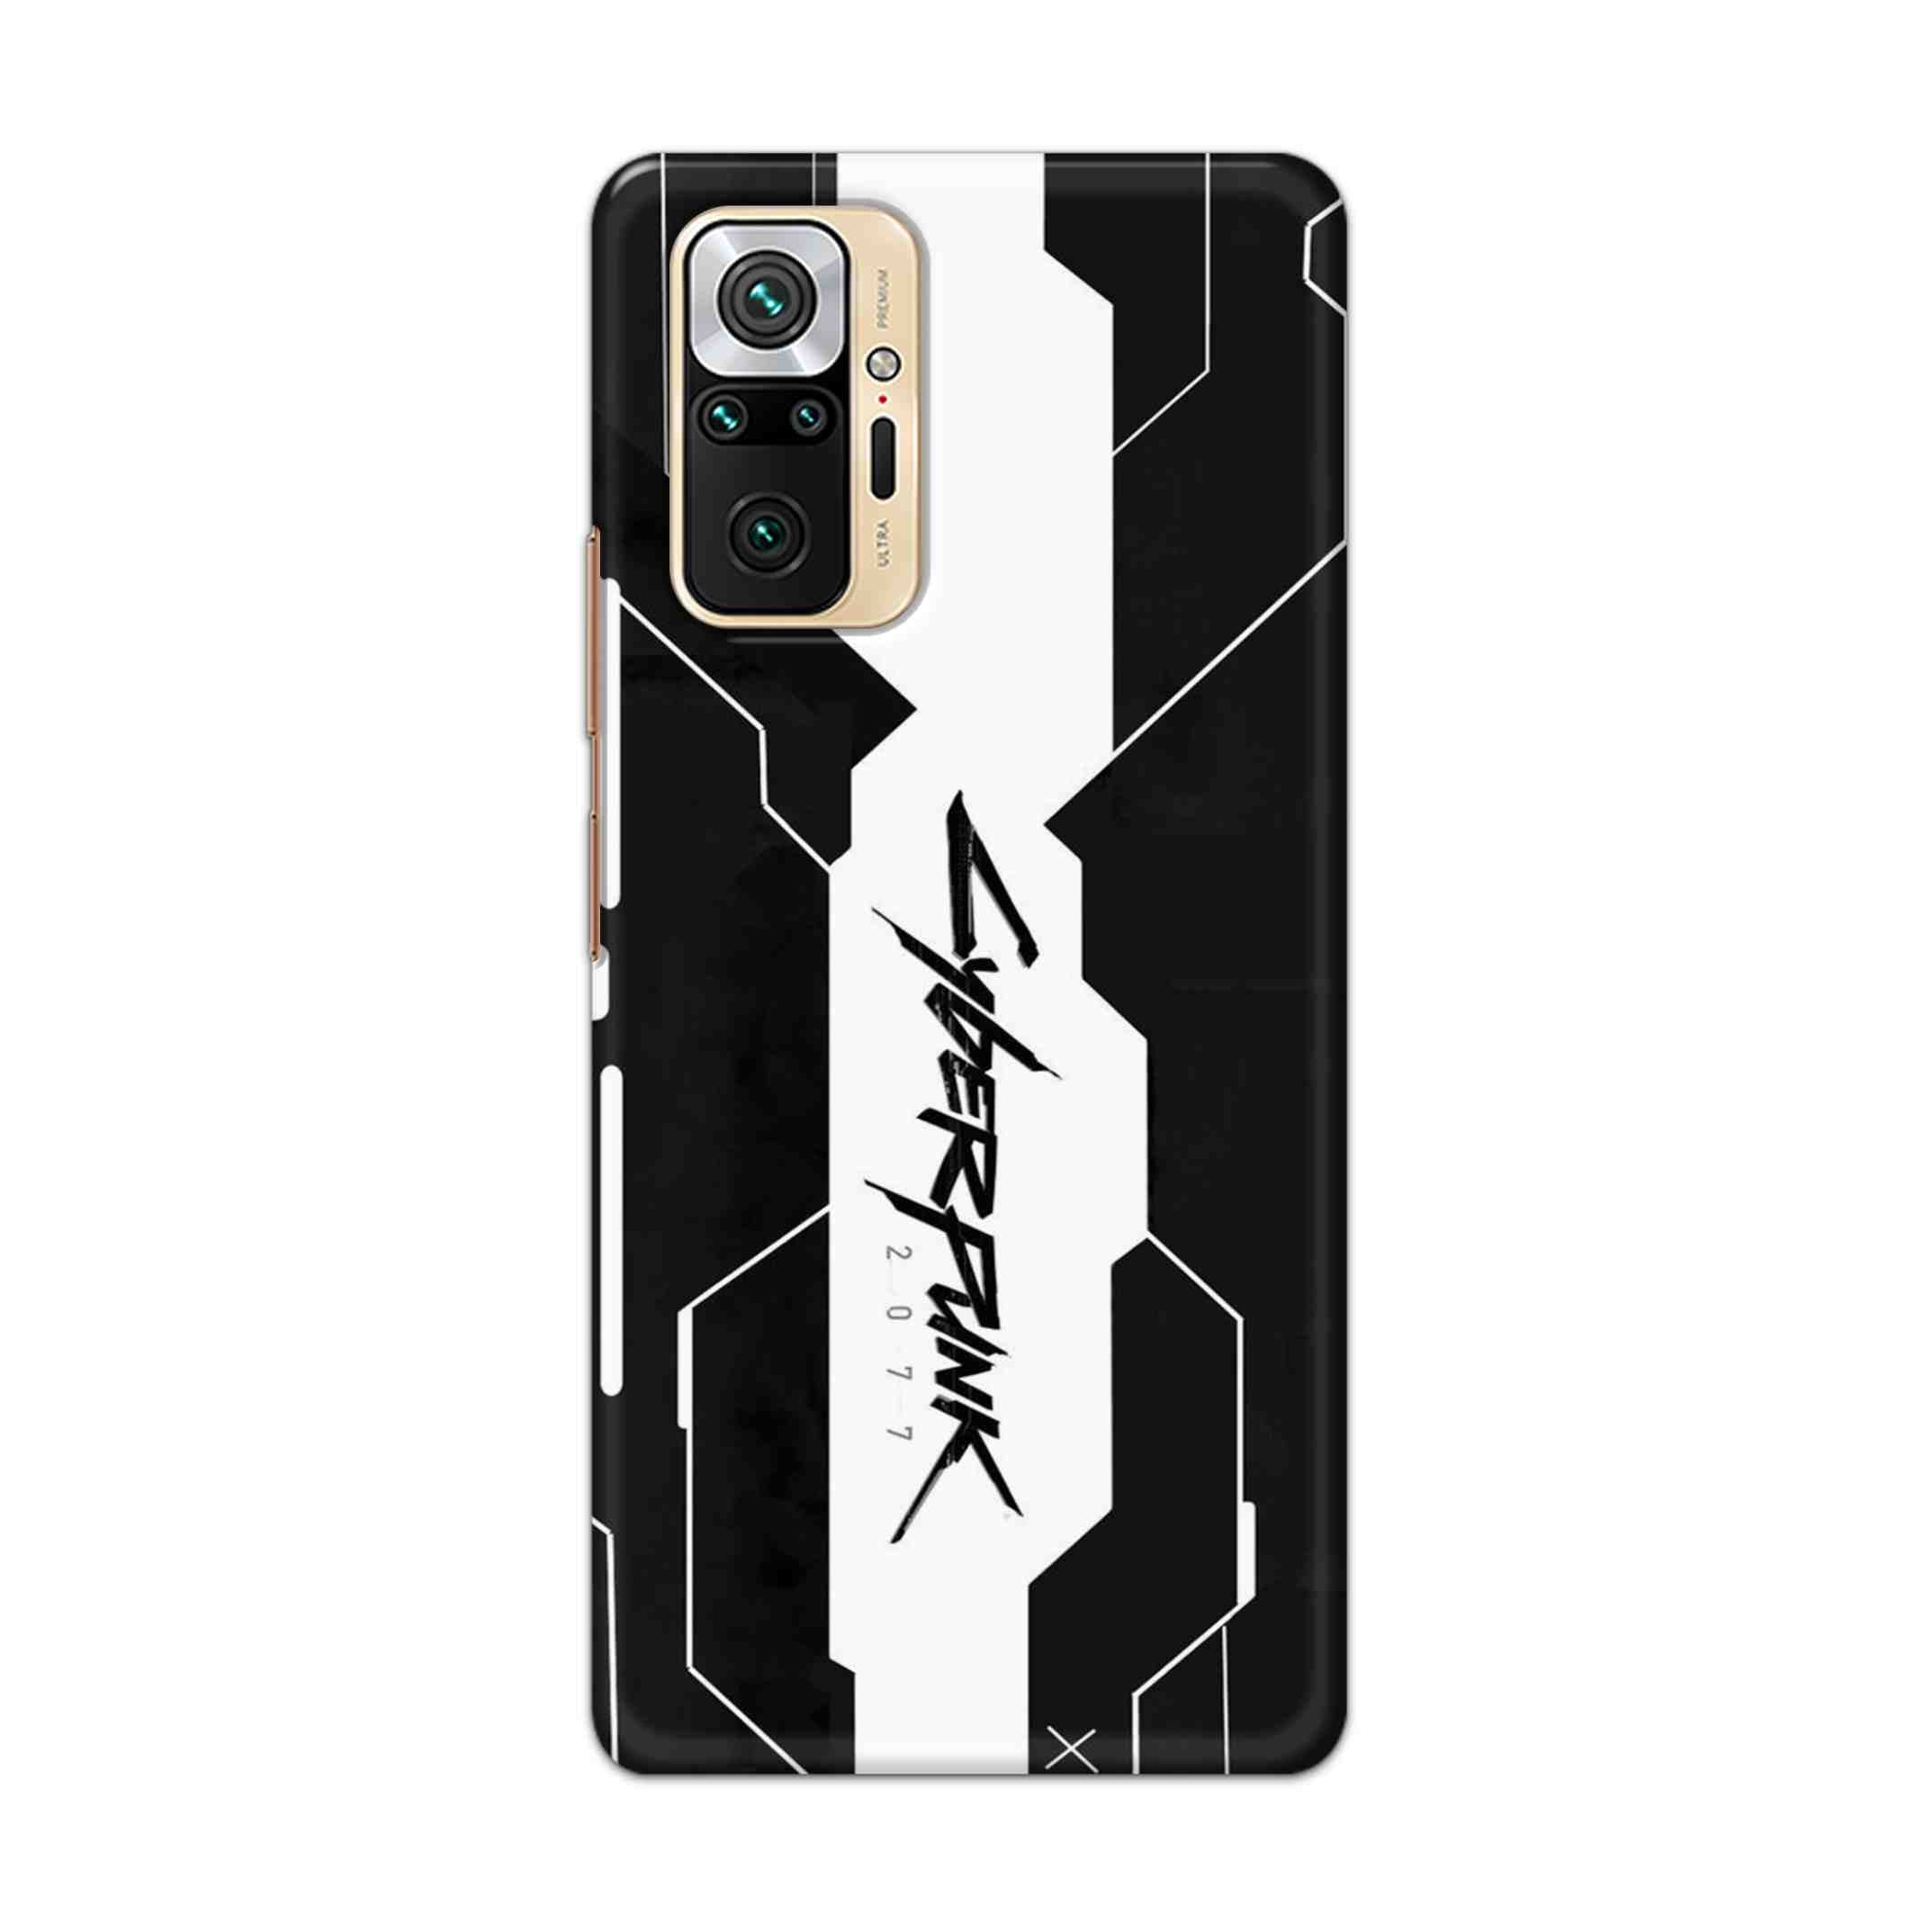 Buy Cyberpunk 2077 Art Hard Back Mobile Phone Case Cover For Redmi Note 10 Pro Online